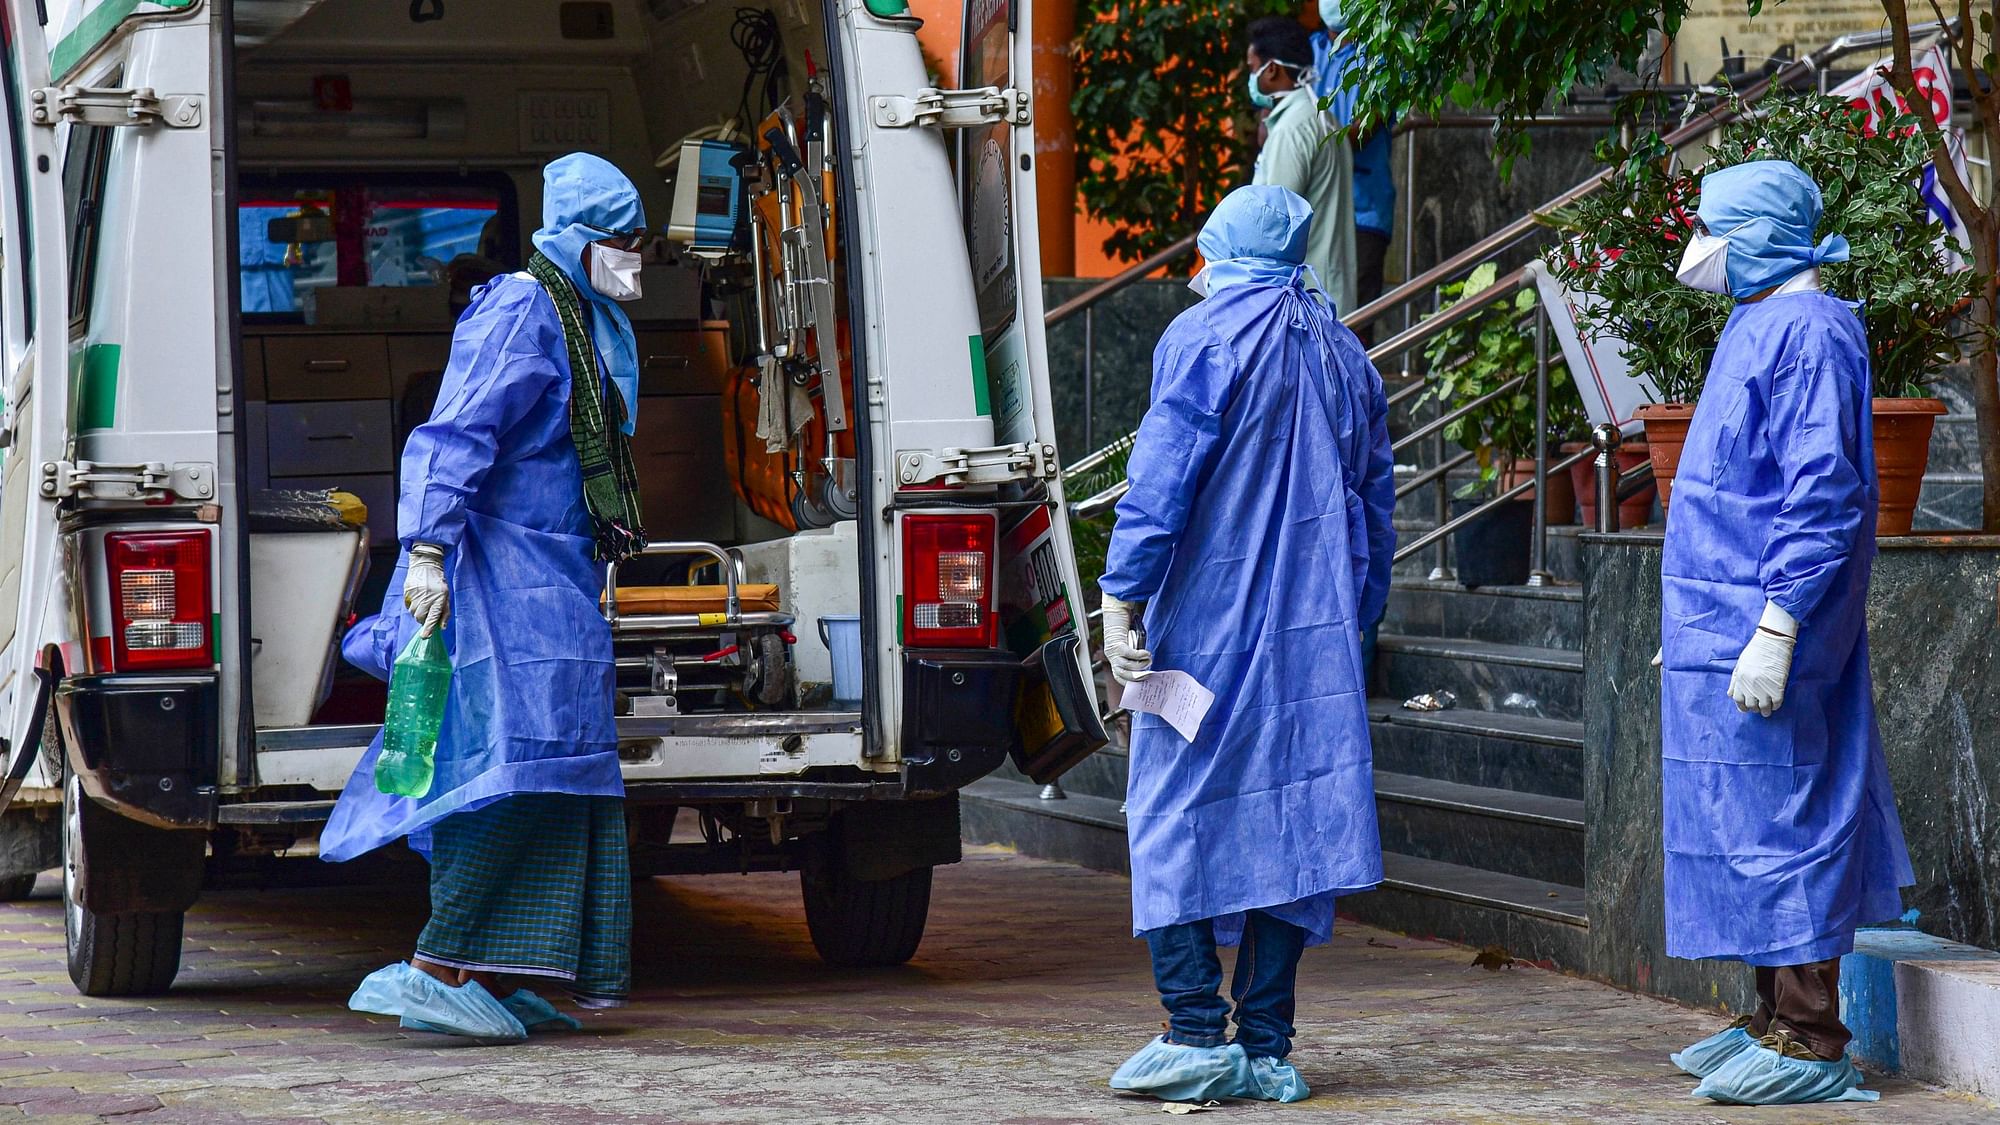 India reported its fourth death from COVID-19, the disease caused by the novel coronavirus.